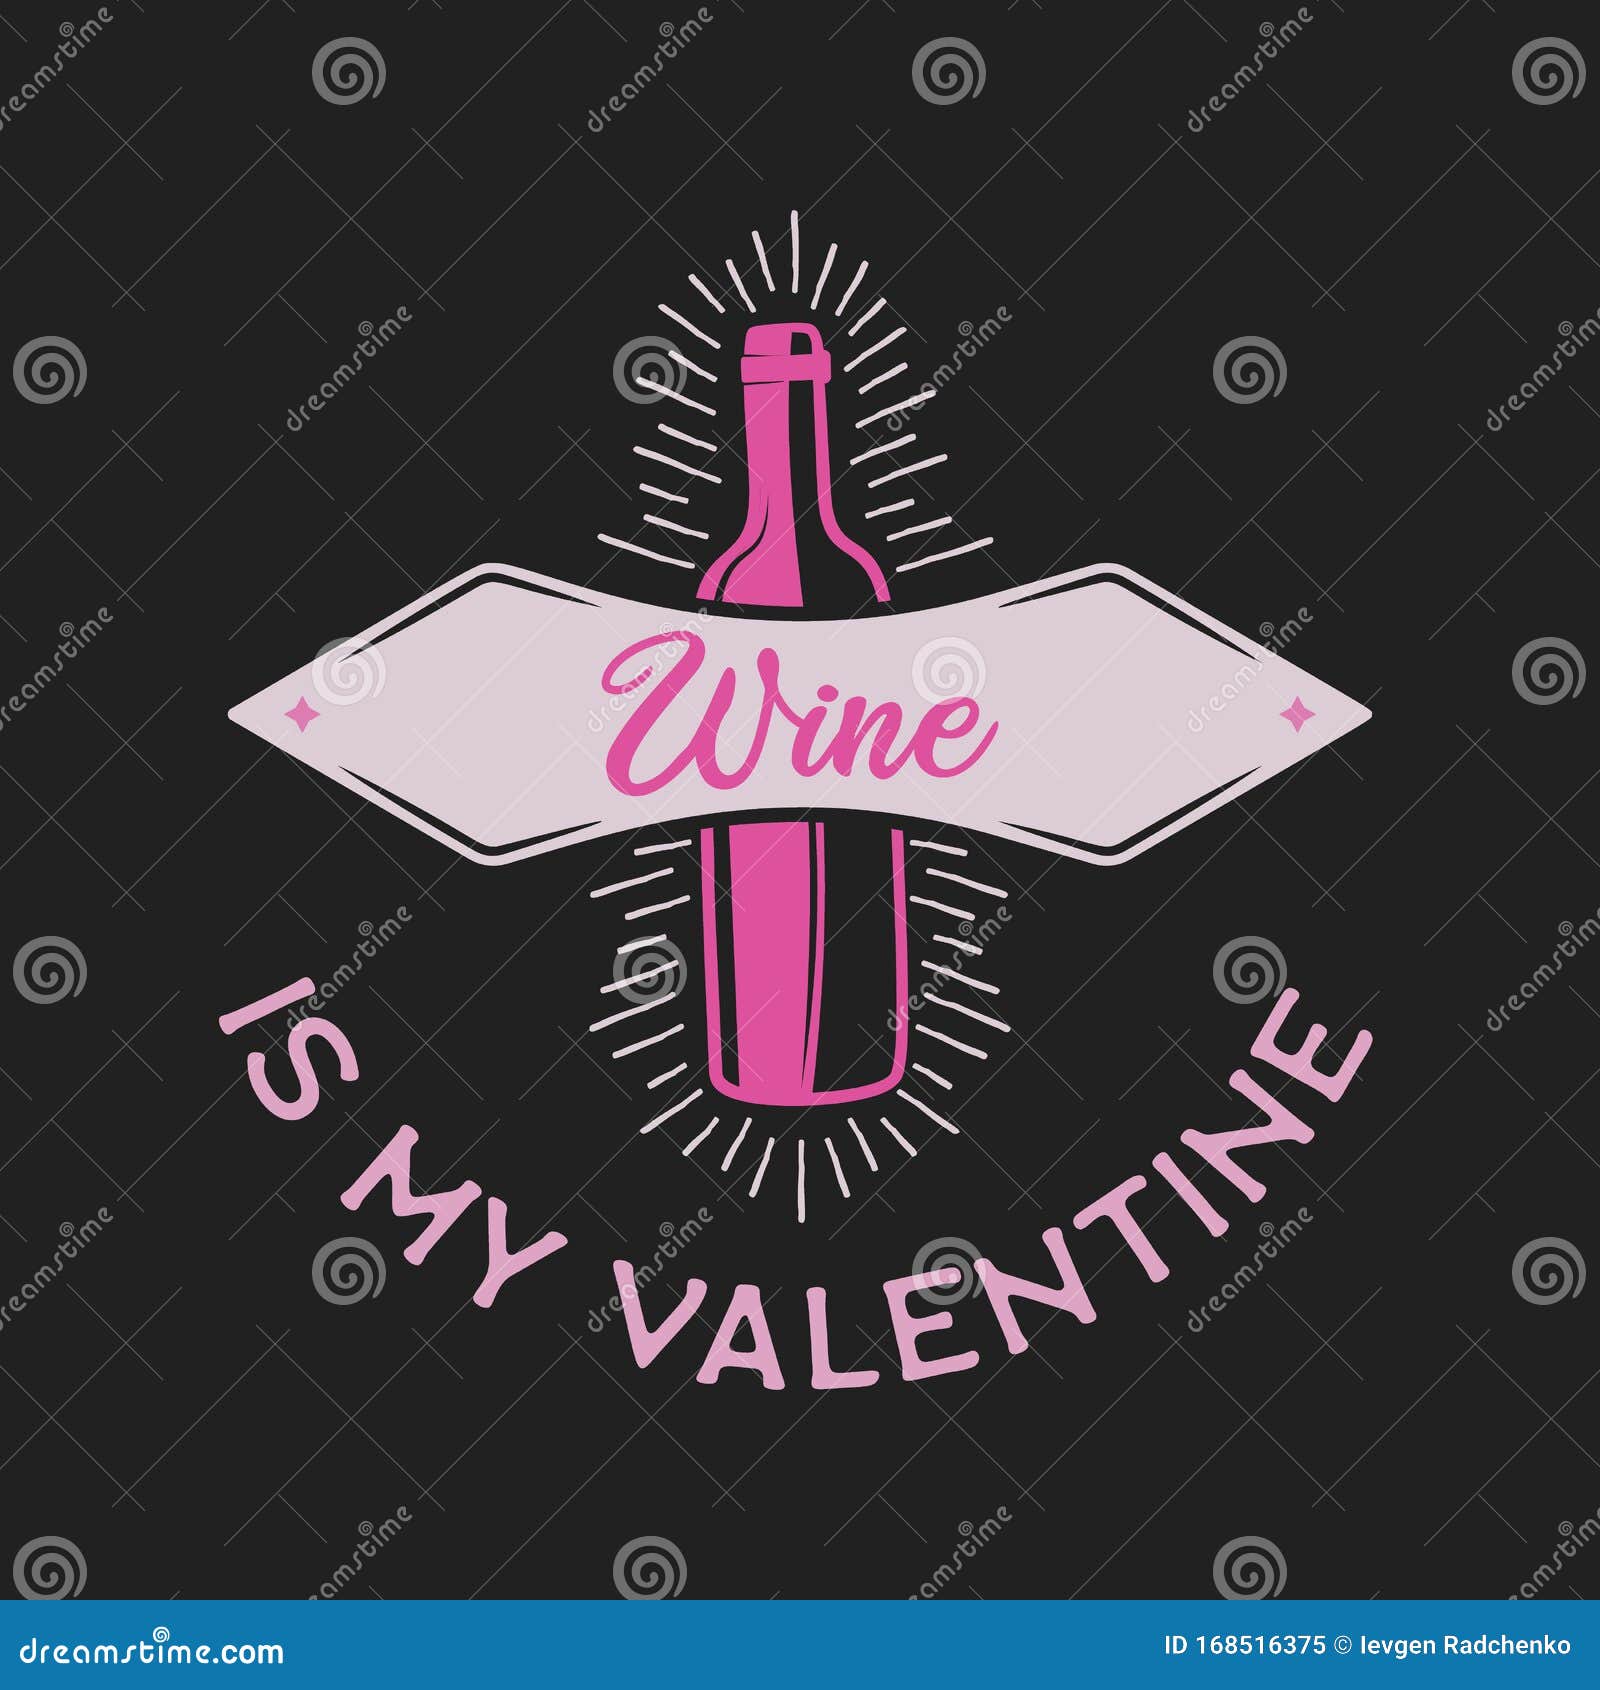 Funny Sarcastic Valentines Day Typography Logo Emblem. Wine is My Valentine  Quote Stock Vector - Illustration of print, decoration: 168516375